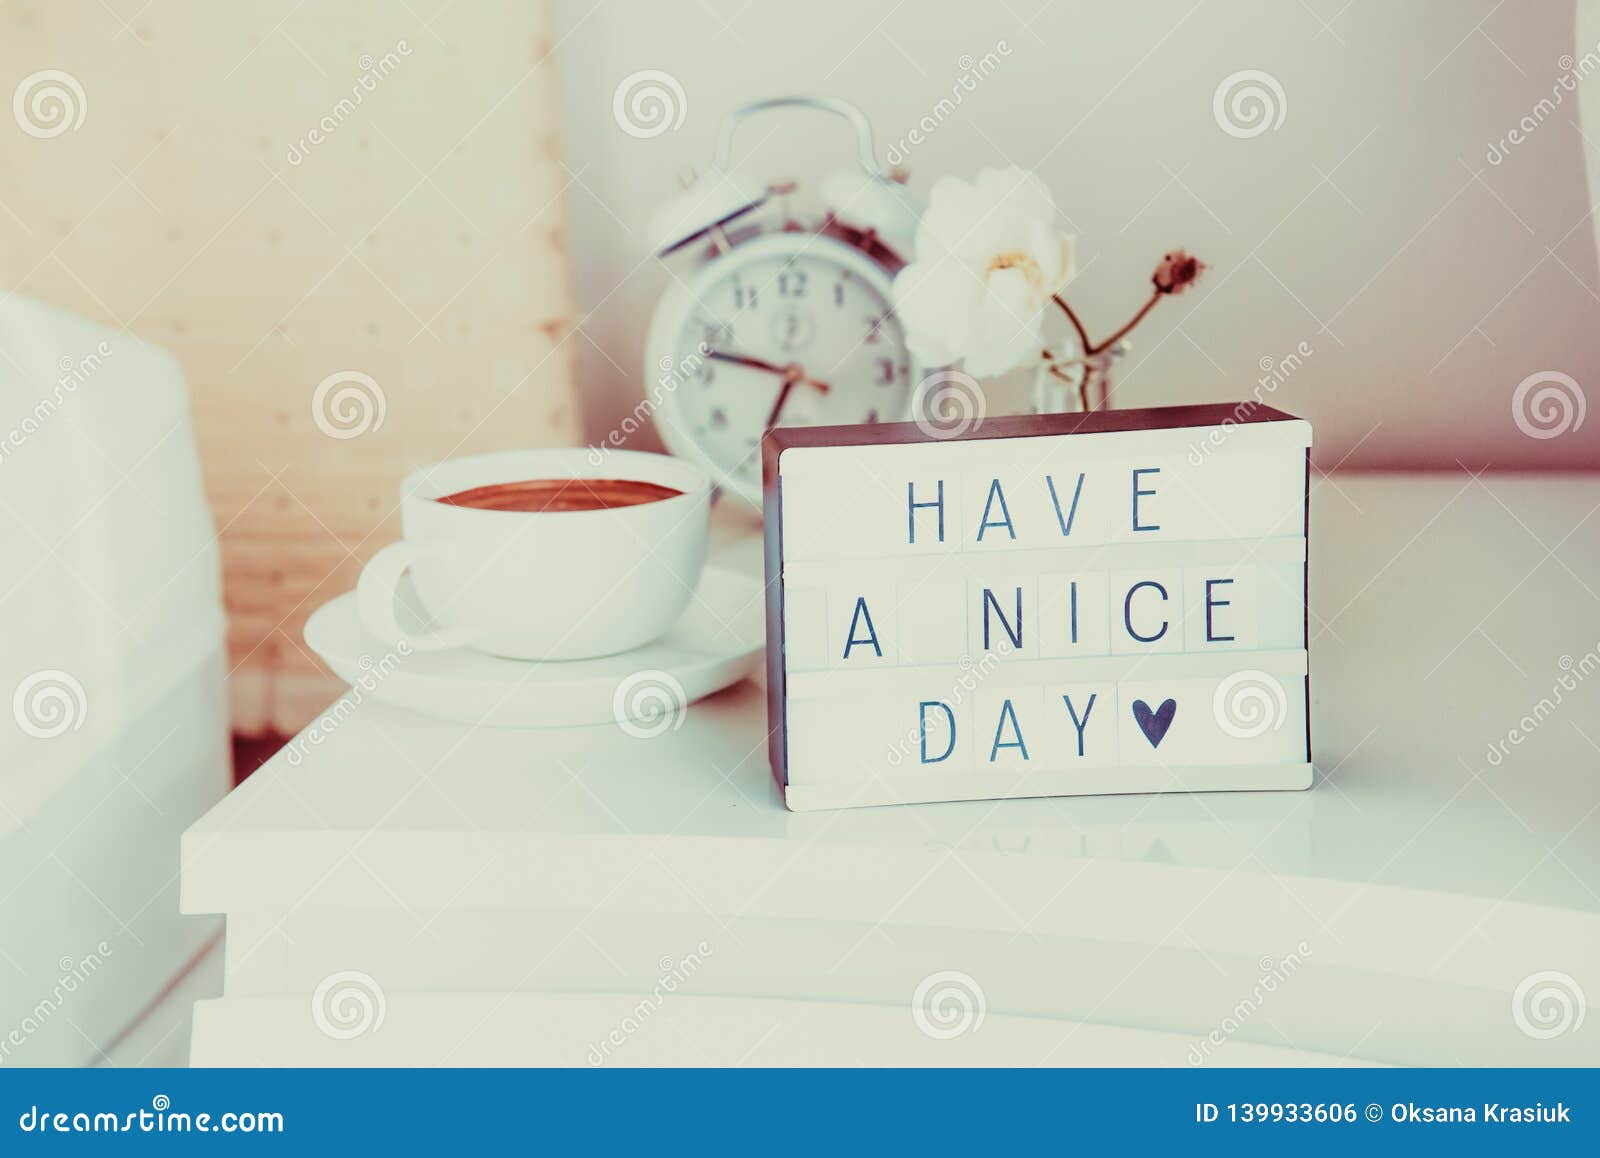 Have A Nice Day Message On Lighted Box Alarm Clock Cup Of Coffee